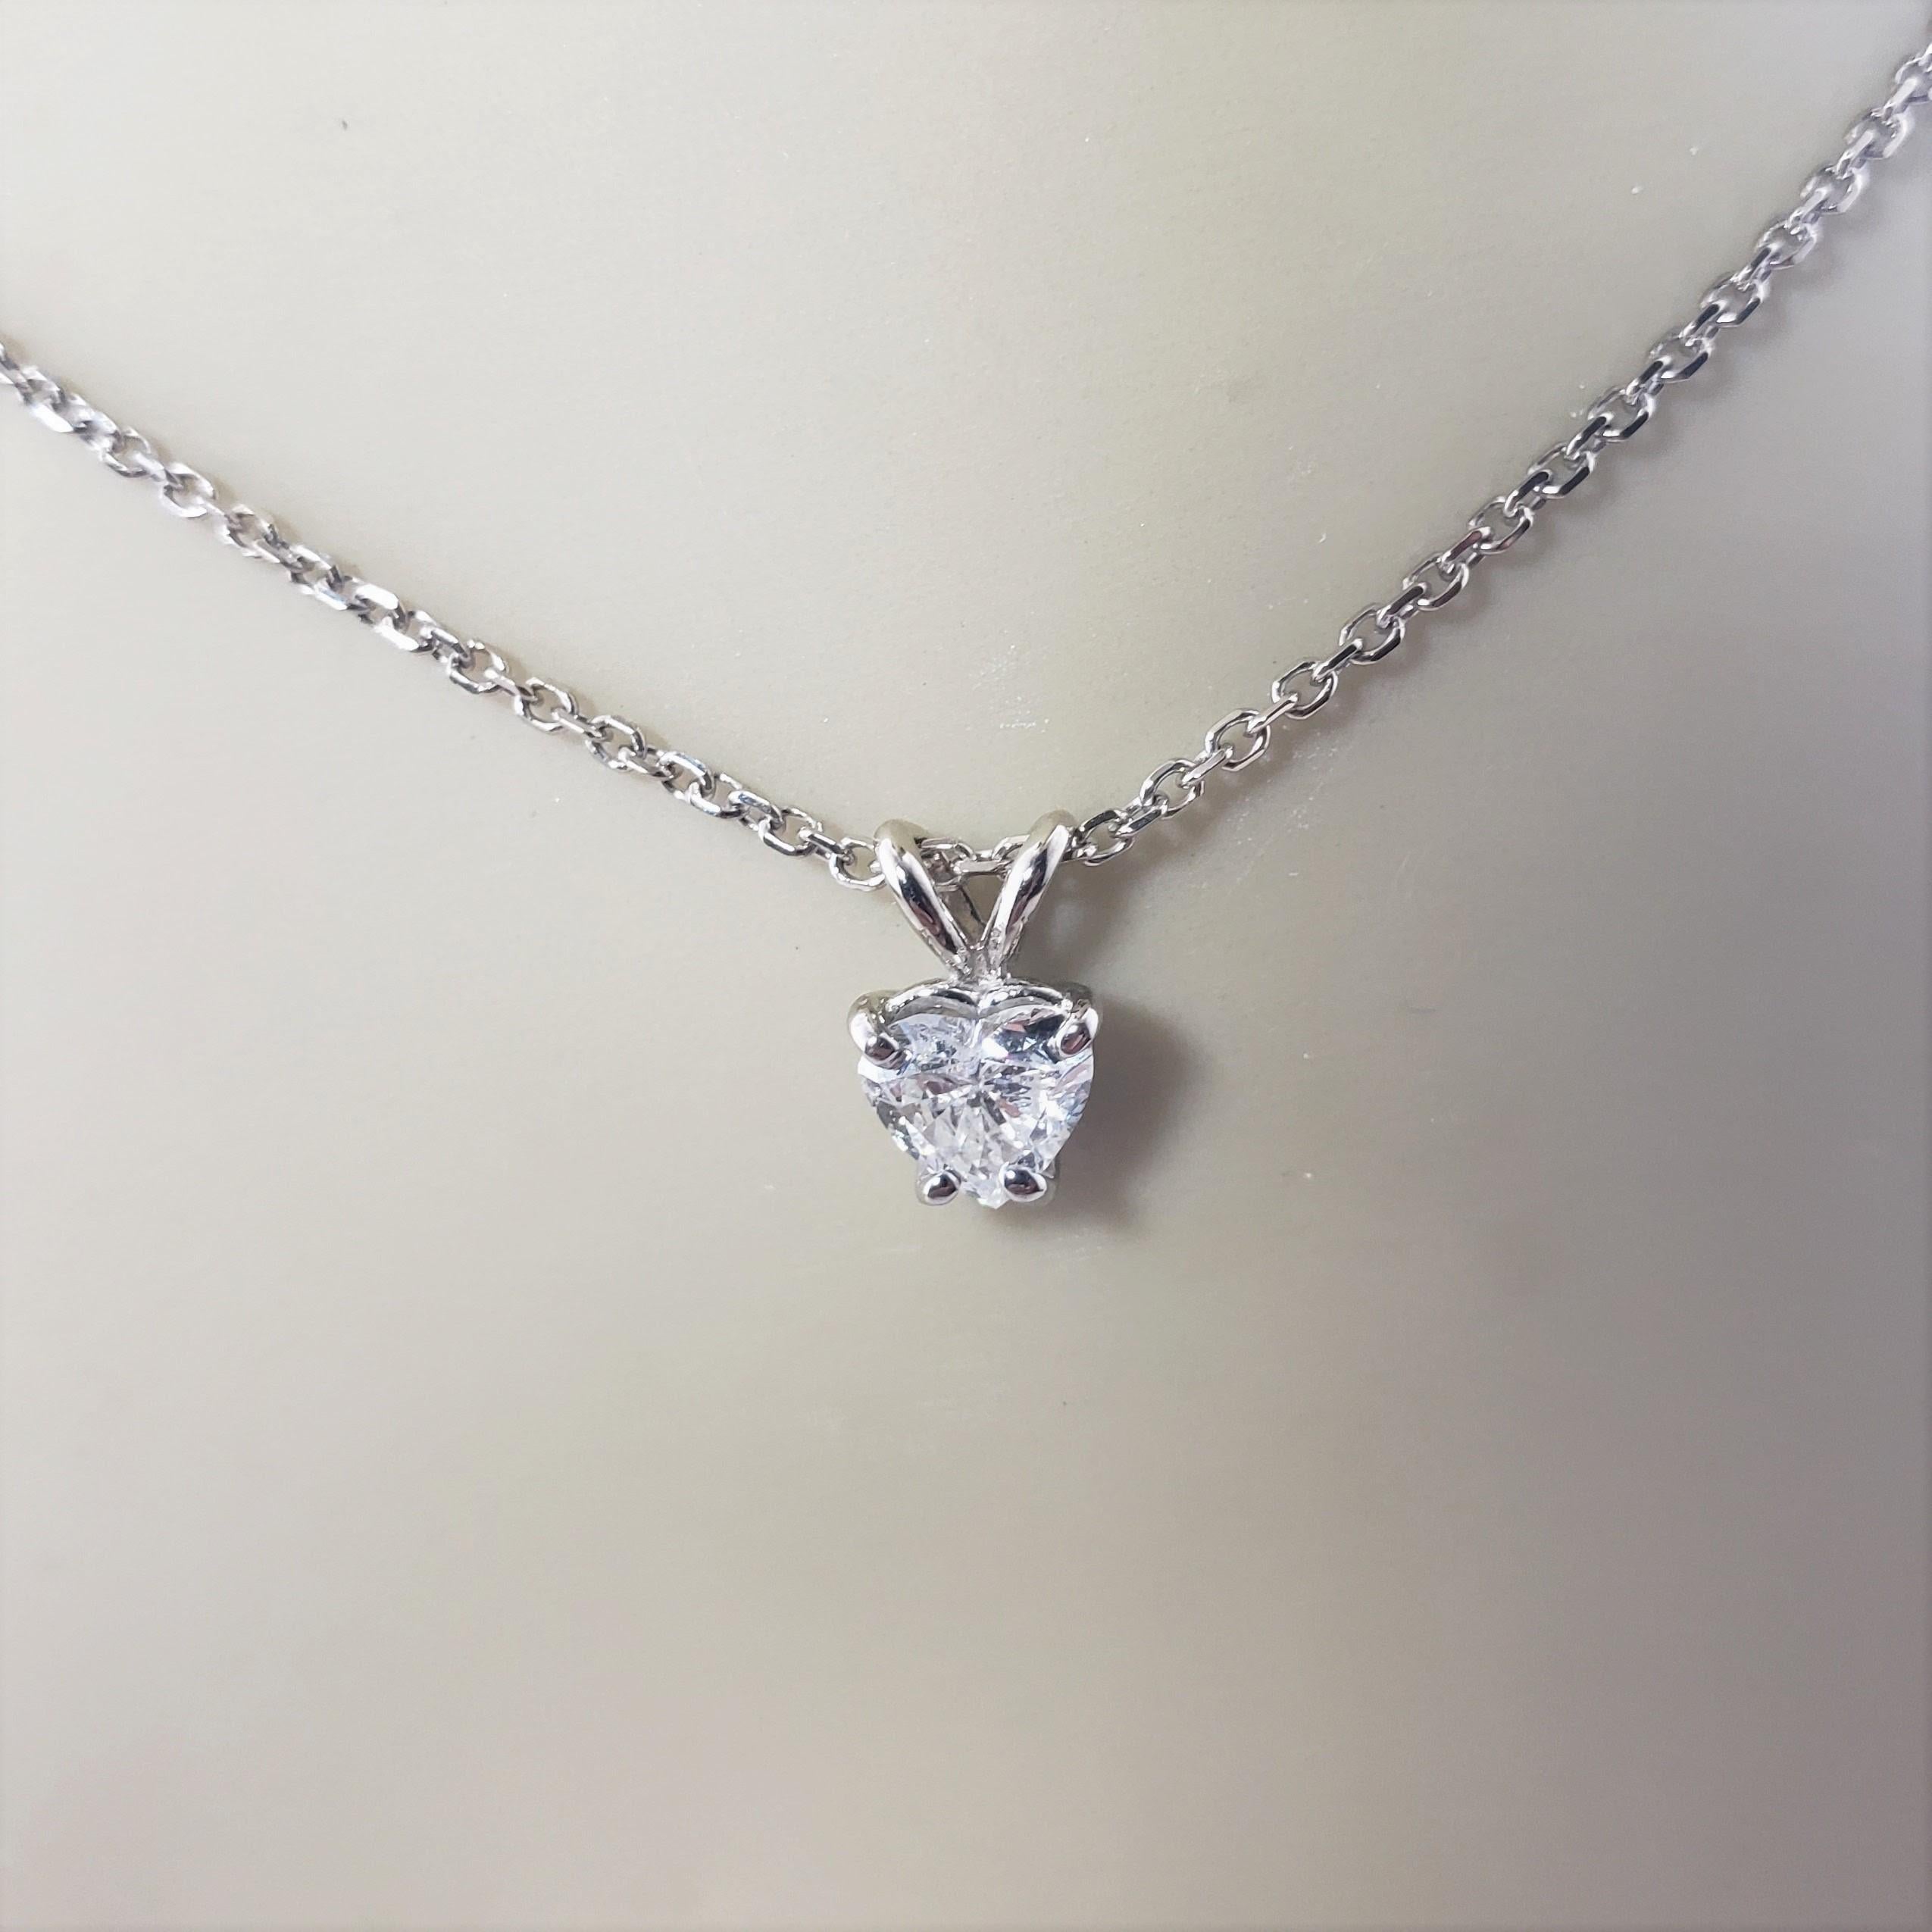 14 Karat White Gold Heart Shaped Diamond Pendant Necklace In Good Condition For Sale In Washington Depot, CT